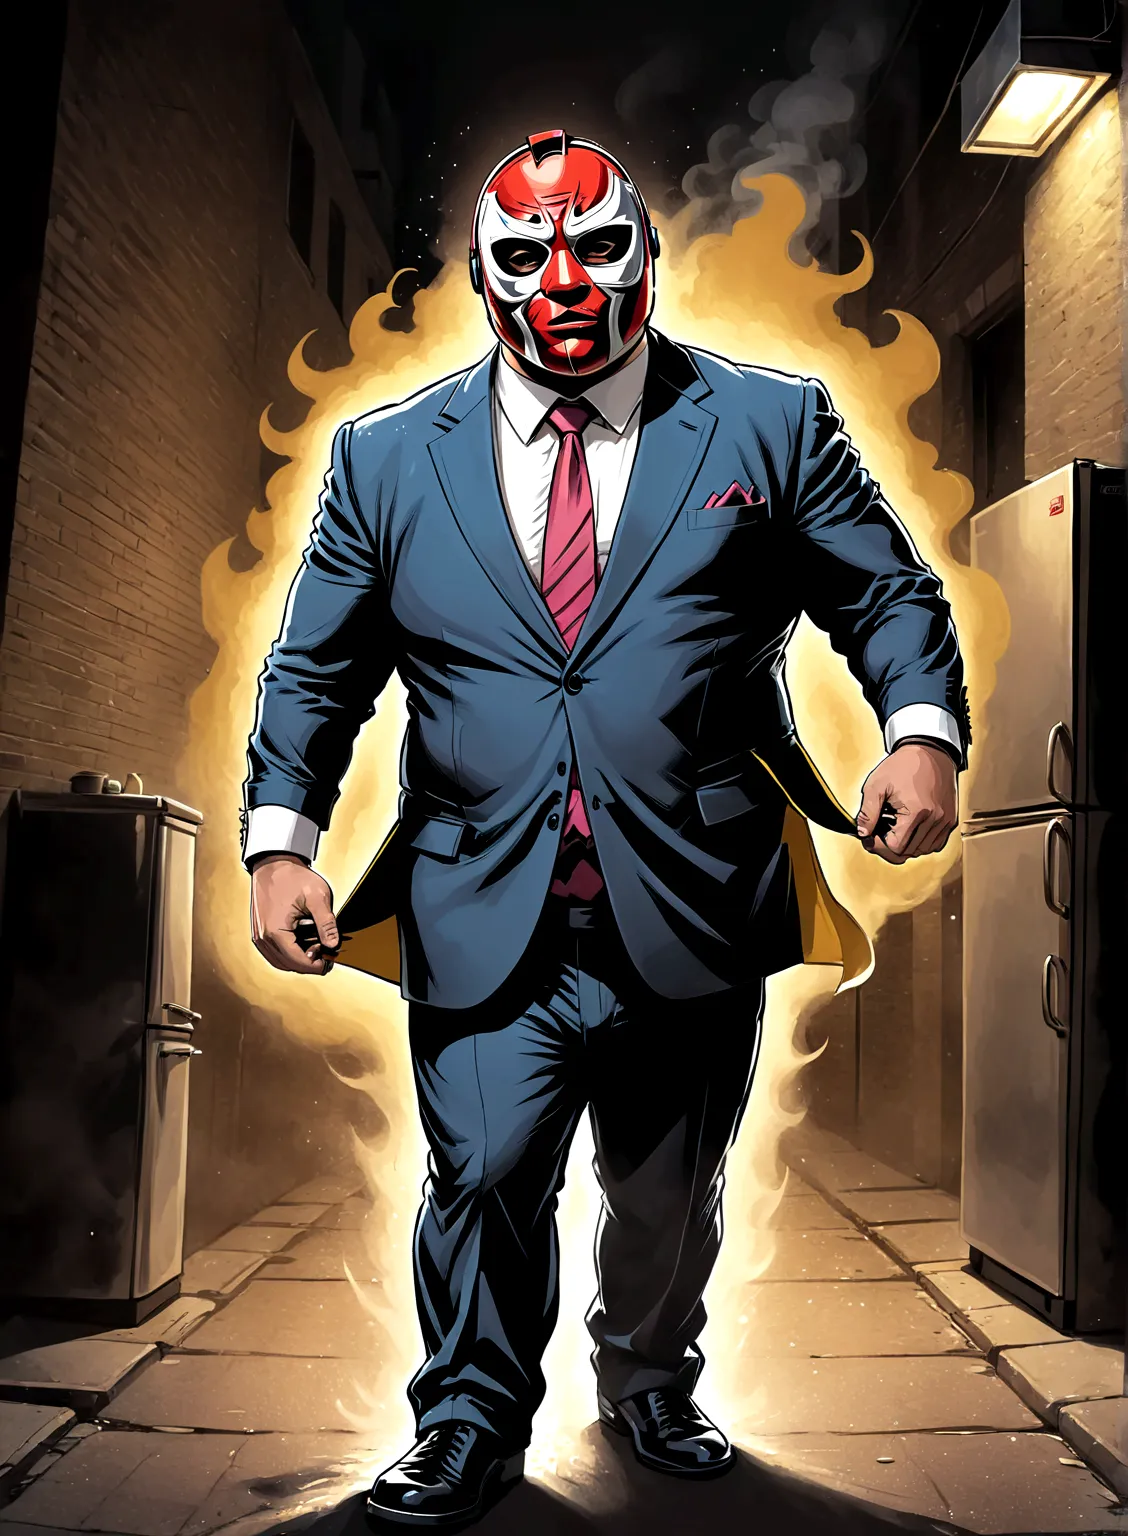 Minimalistic caricature comic artwork of a large man in a business suit, wearing a wrestling mask, cooking in a dark alley, look...